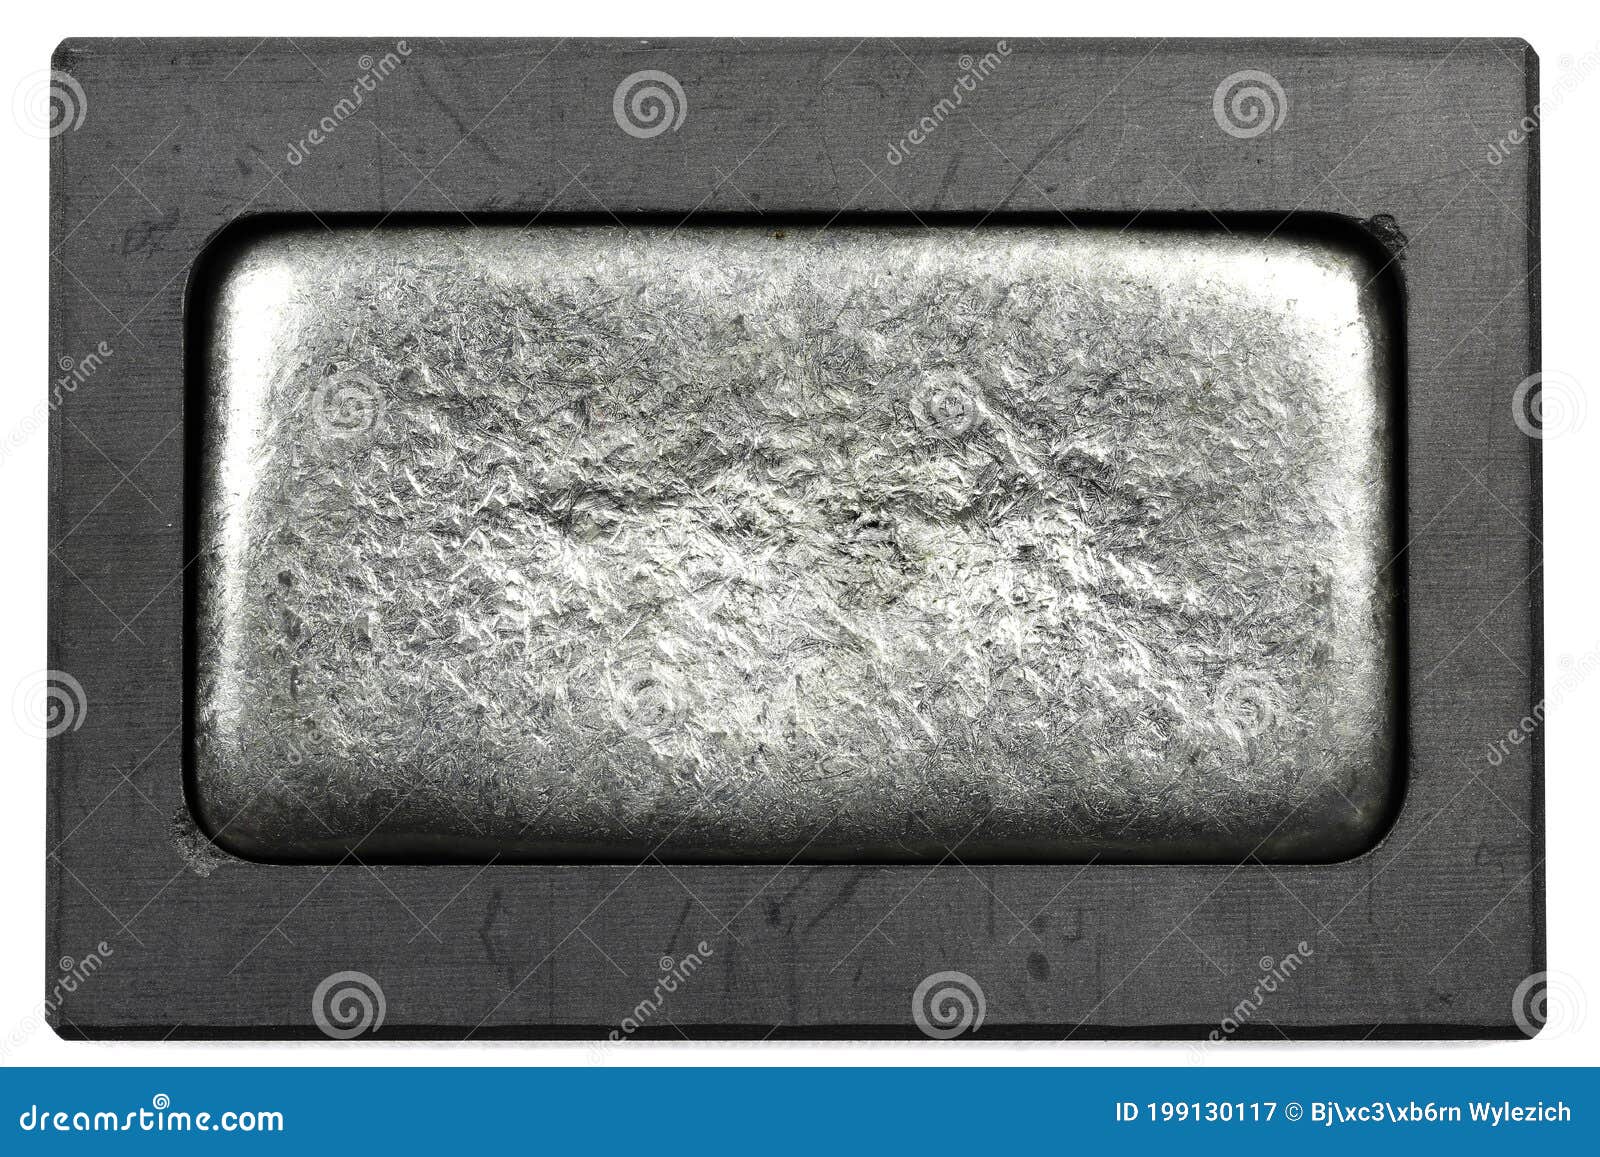 Metal bar in graphite mold stock image. Image of investment - 199130117